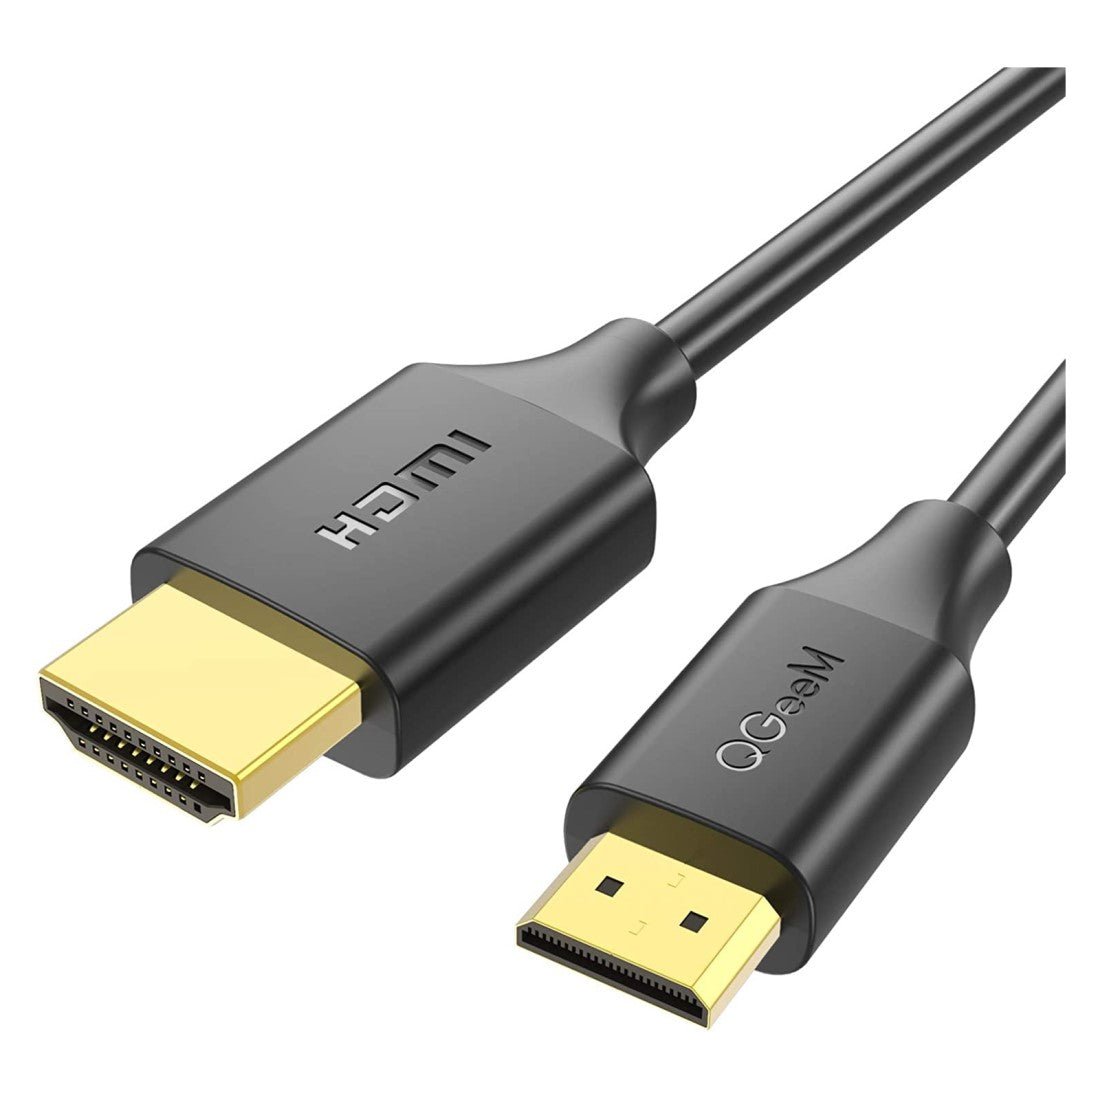 pibox India, Micro HDMI cable to HDMI Cable, 4K 60Hz, 1.5 Meter 5